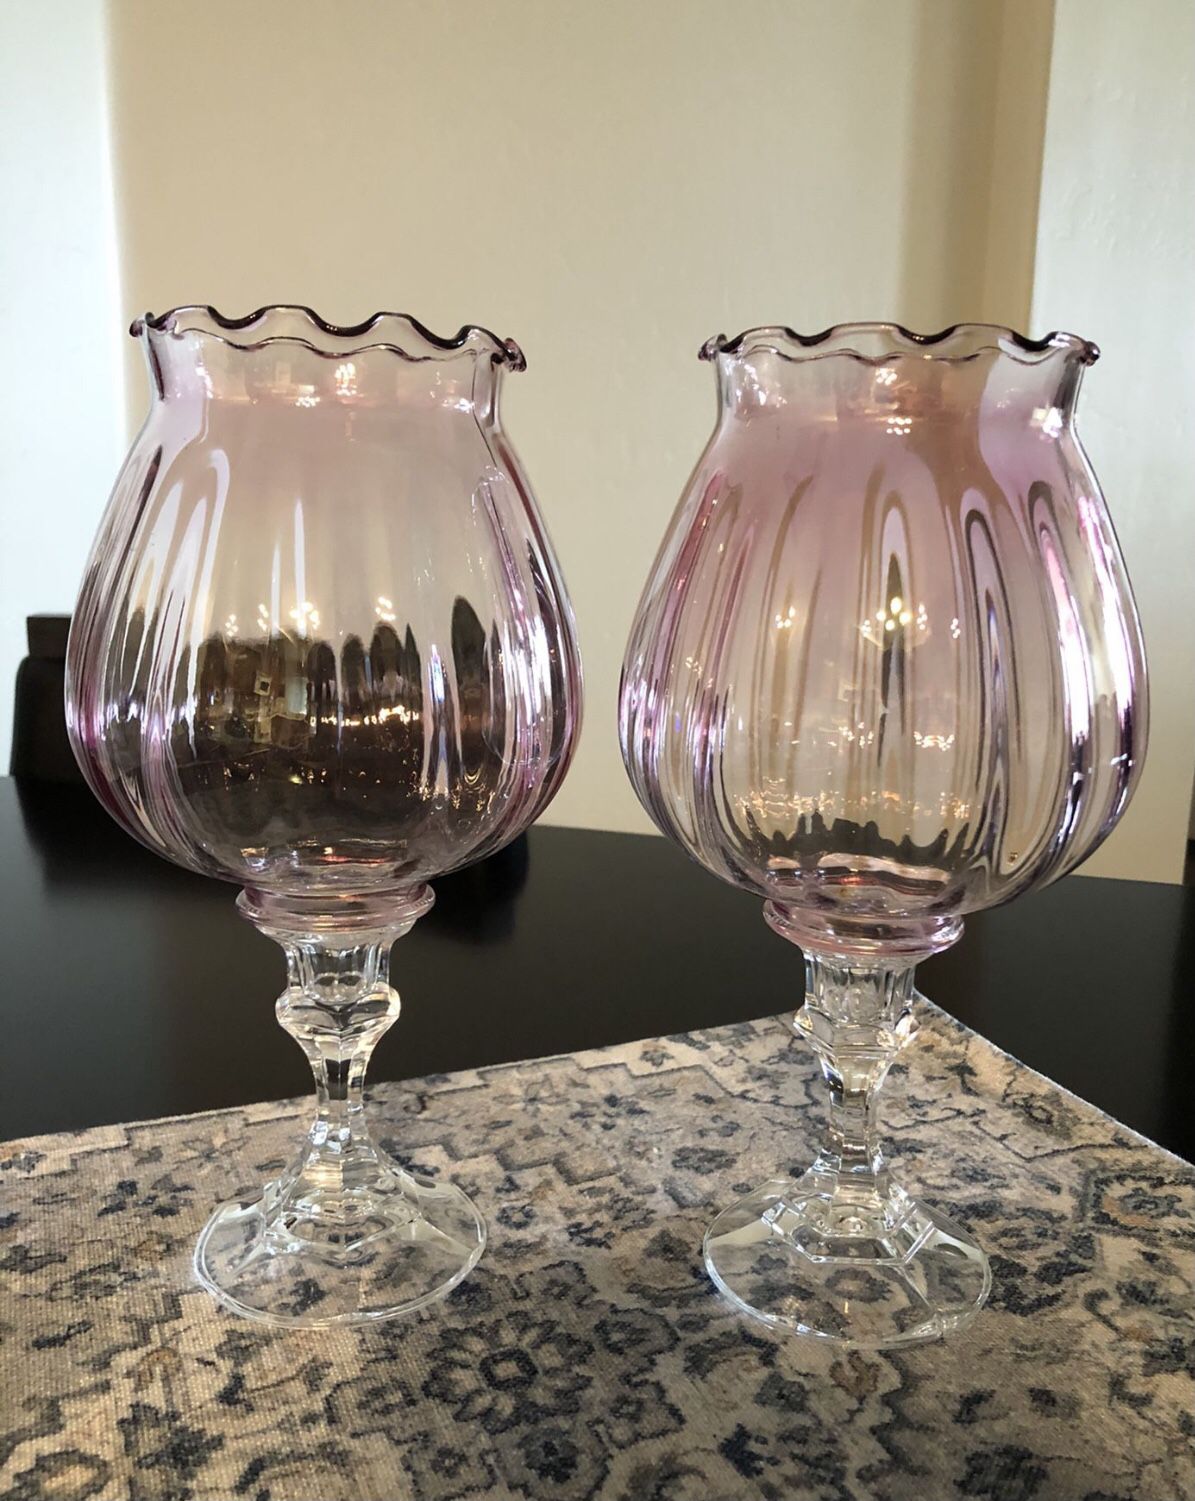 PINK GLASS CANDLE HOLDERS 